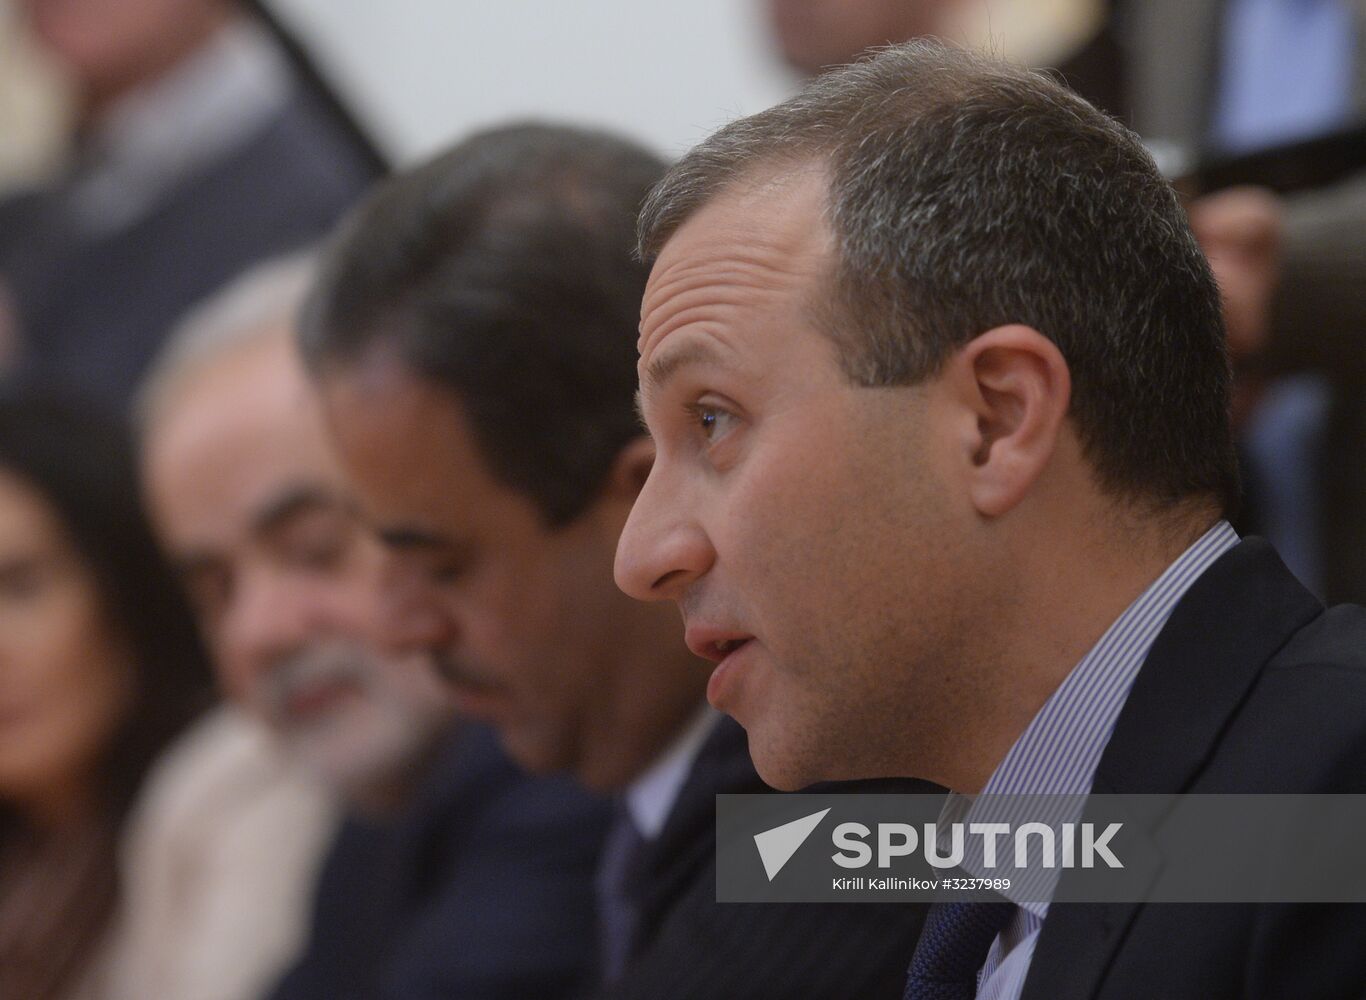 Russian Foreign Minister Sergei Lavrov and Lebanese Foreign Minister Gebran Bassil at meeting